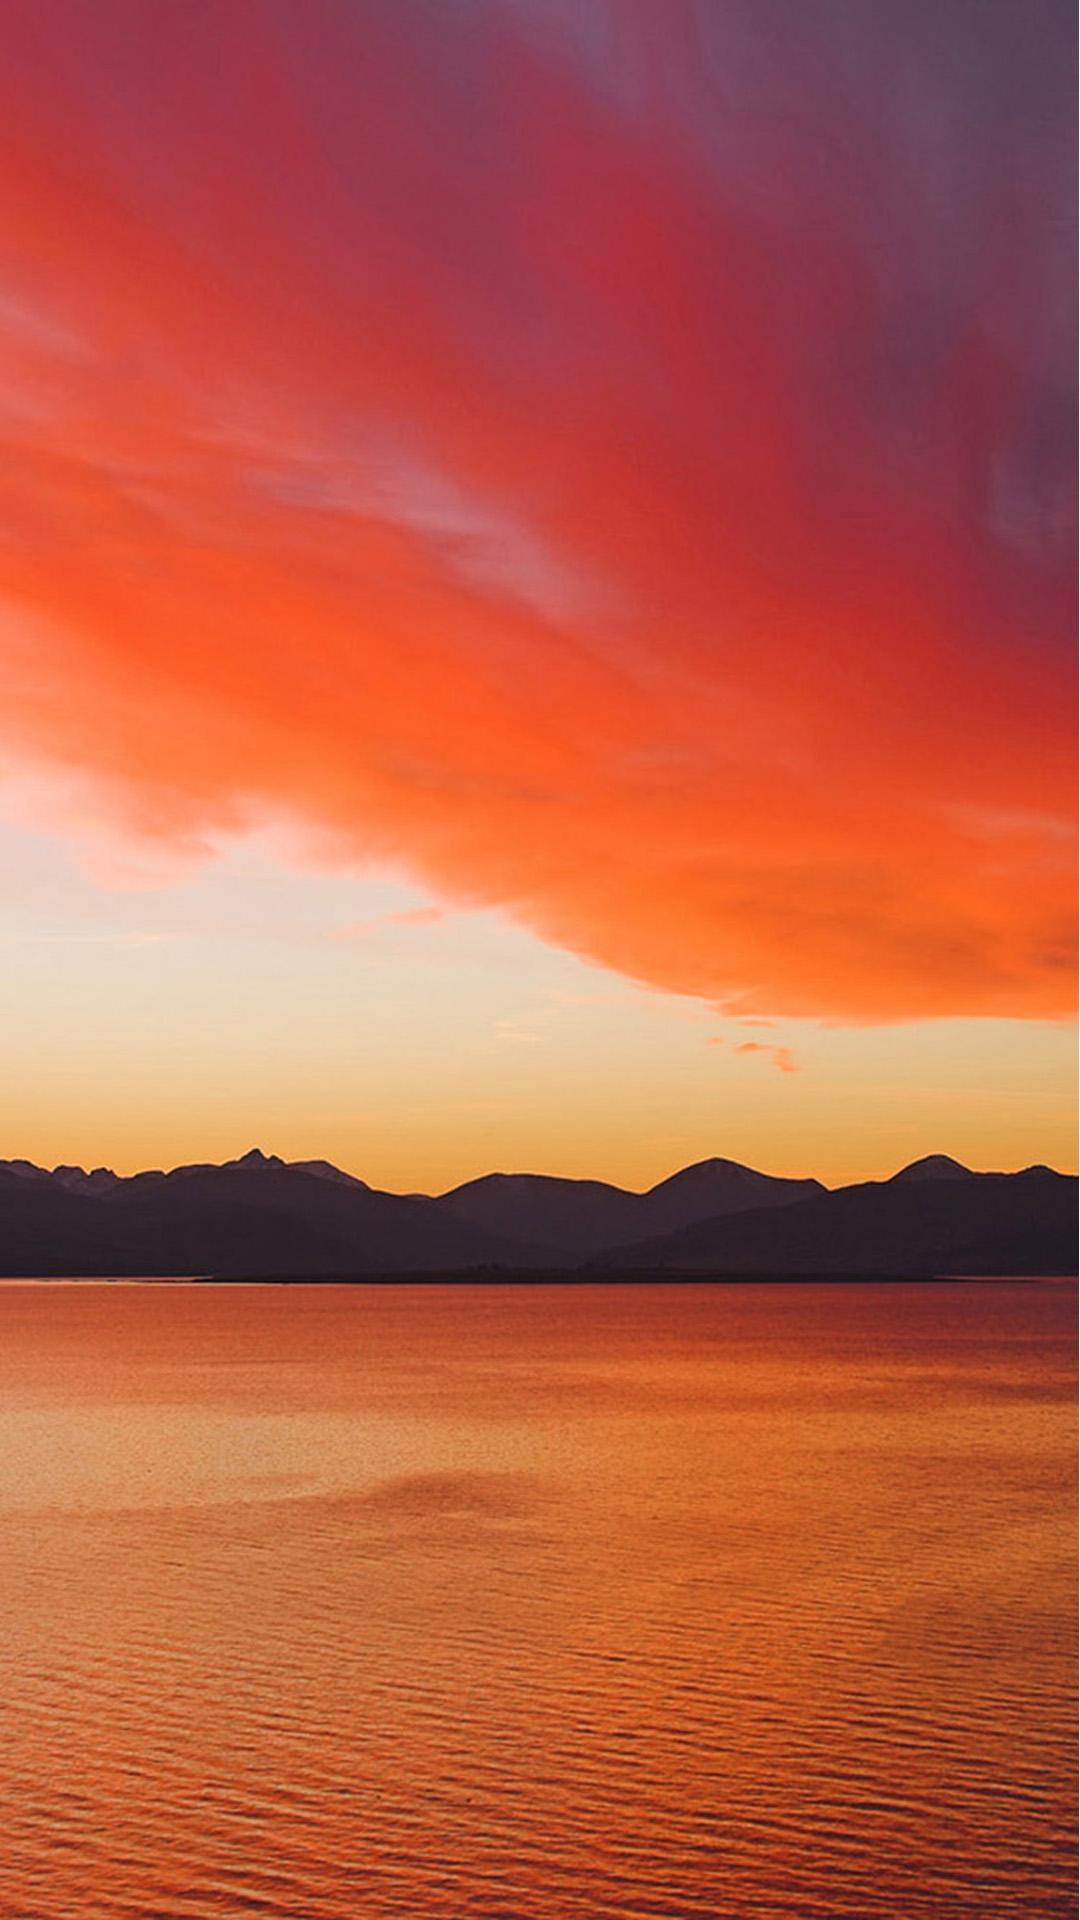 Sunset over the Cuillin Mountains on the Isle of Skye